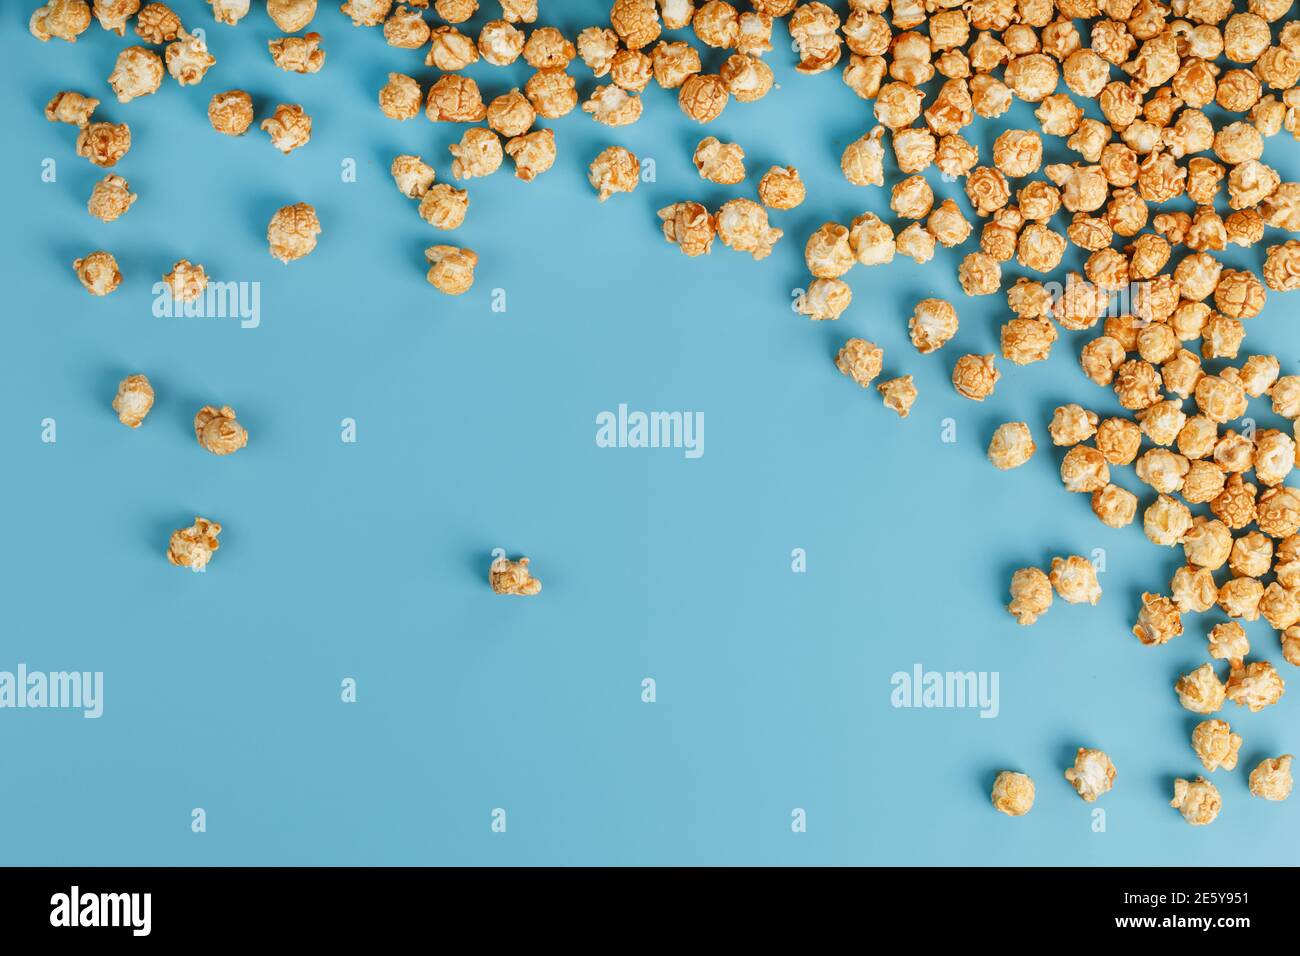 Caramel popcorn by a ripple on a blue background, in the form of a frame. Delicious catch for the films of movies, serials, cartoons. Free rightful, c Stock Photo